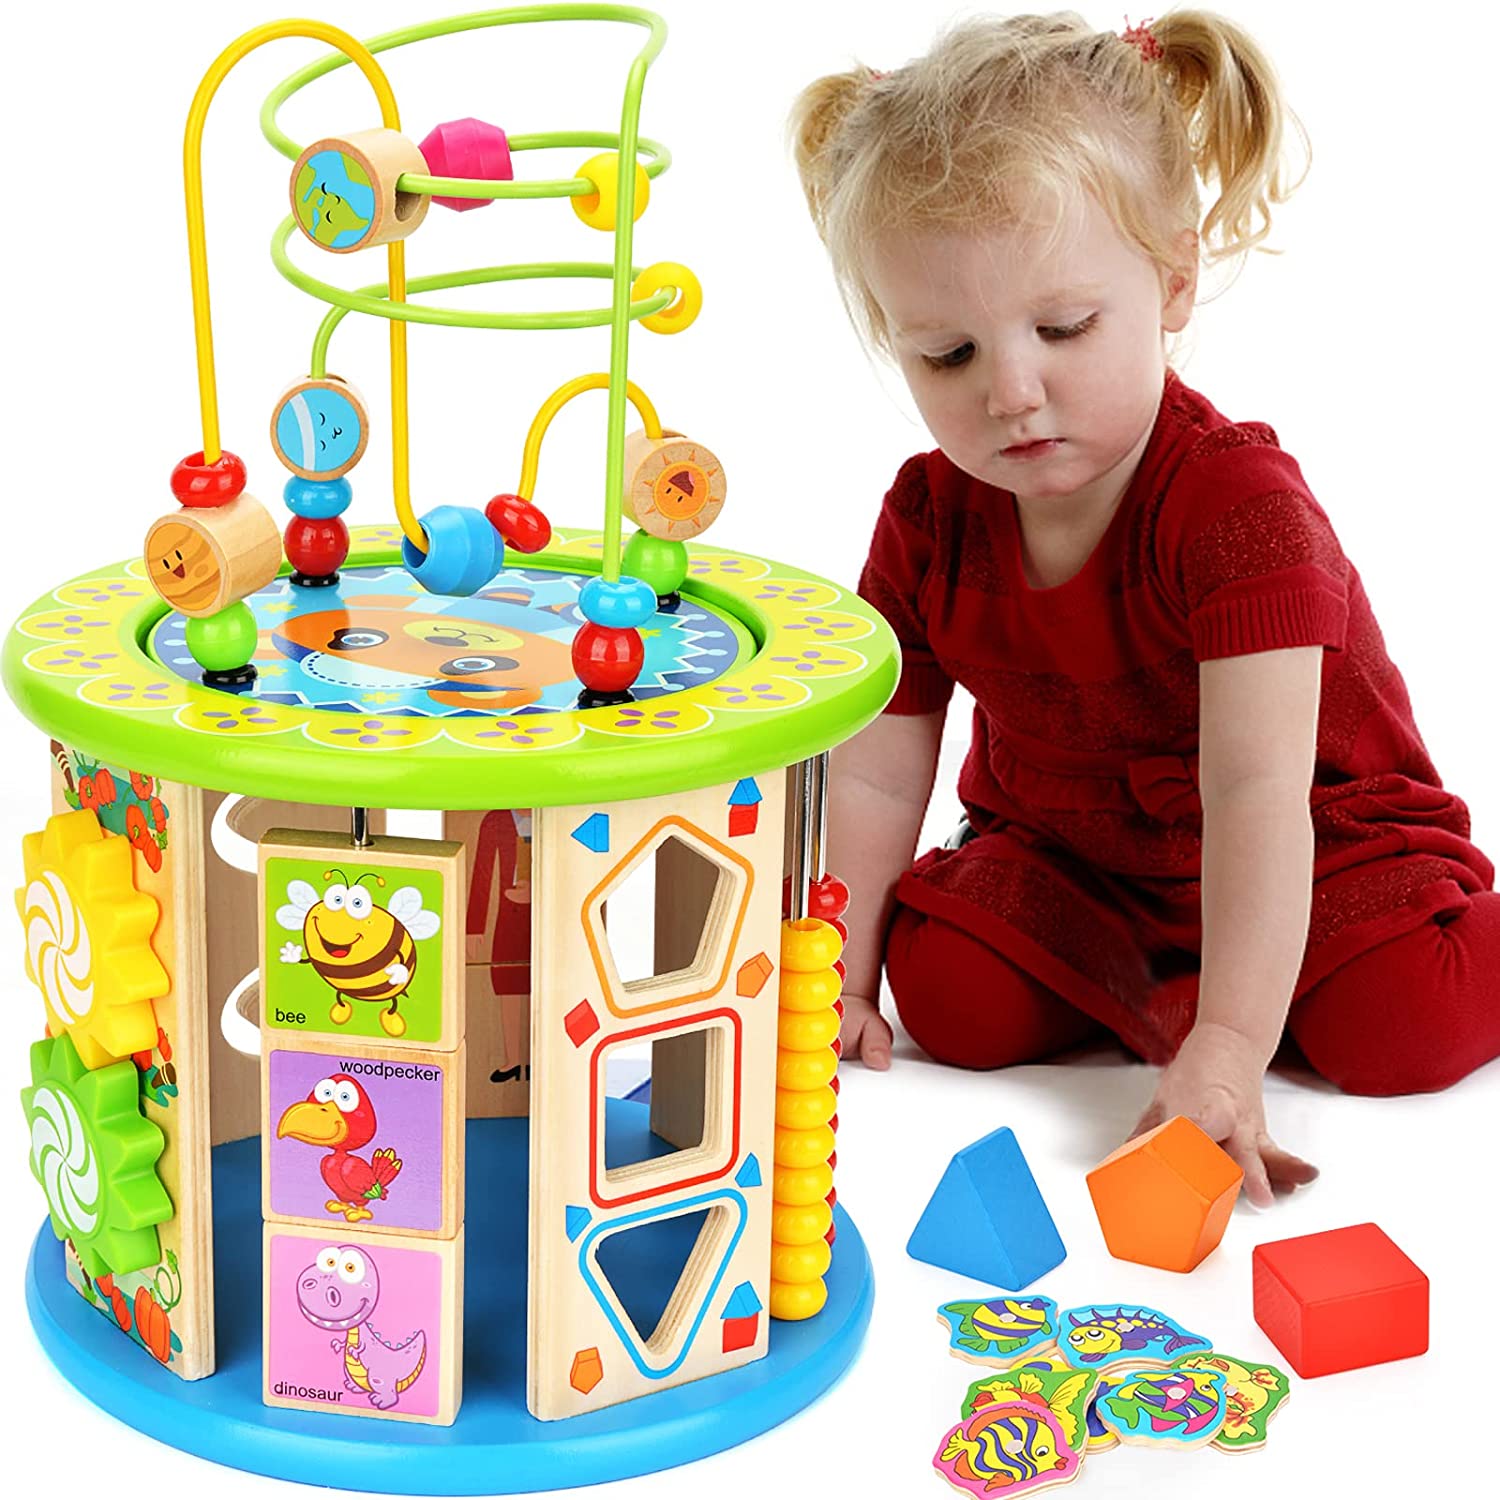 problem solving toys for 1 year old